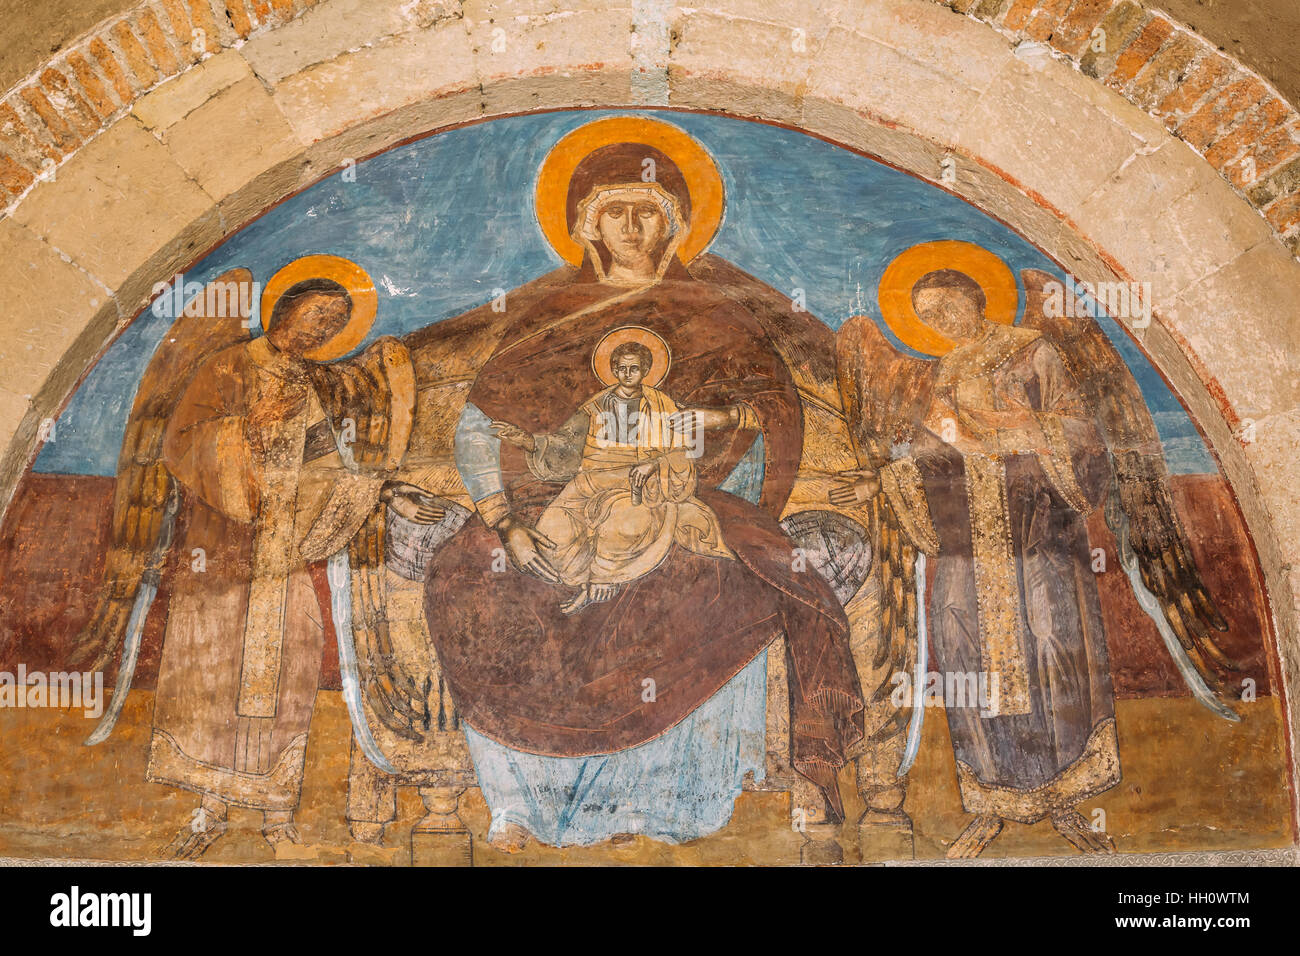 Mtskheta, Georgia - May 20, 2016: Image Of Theotokos With Jesus Christ At Throne And Two Archangels On Fresco At Arch In Svetitskhoveli Cathedral Of T Stock Photo